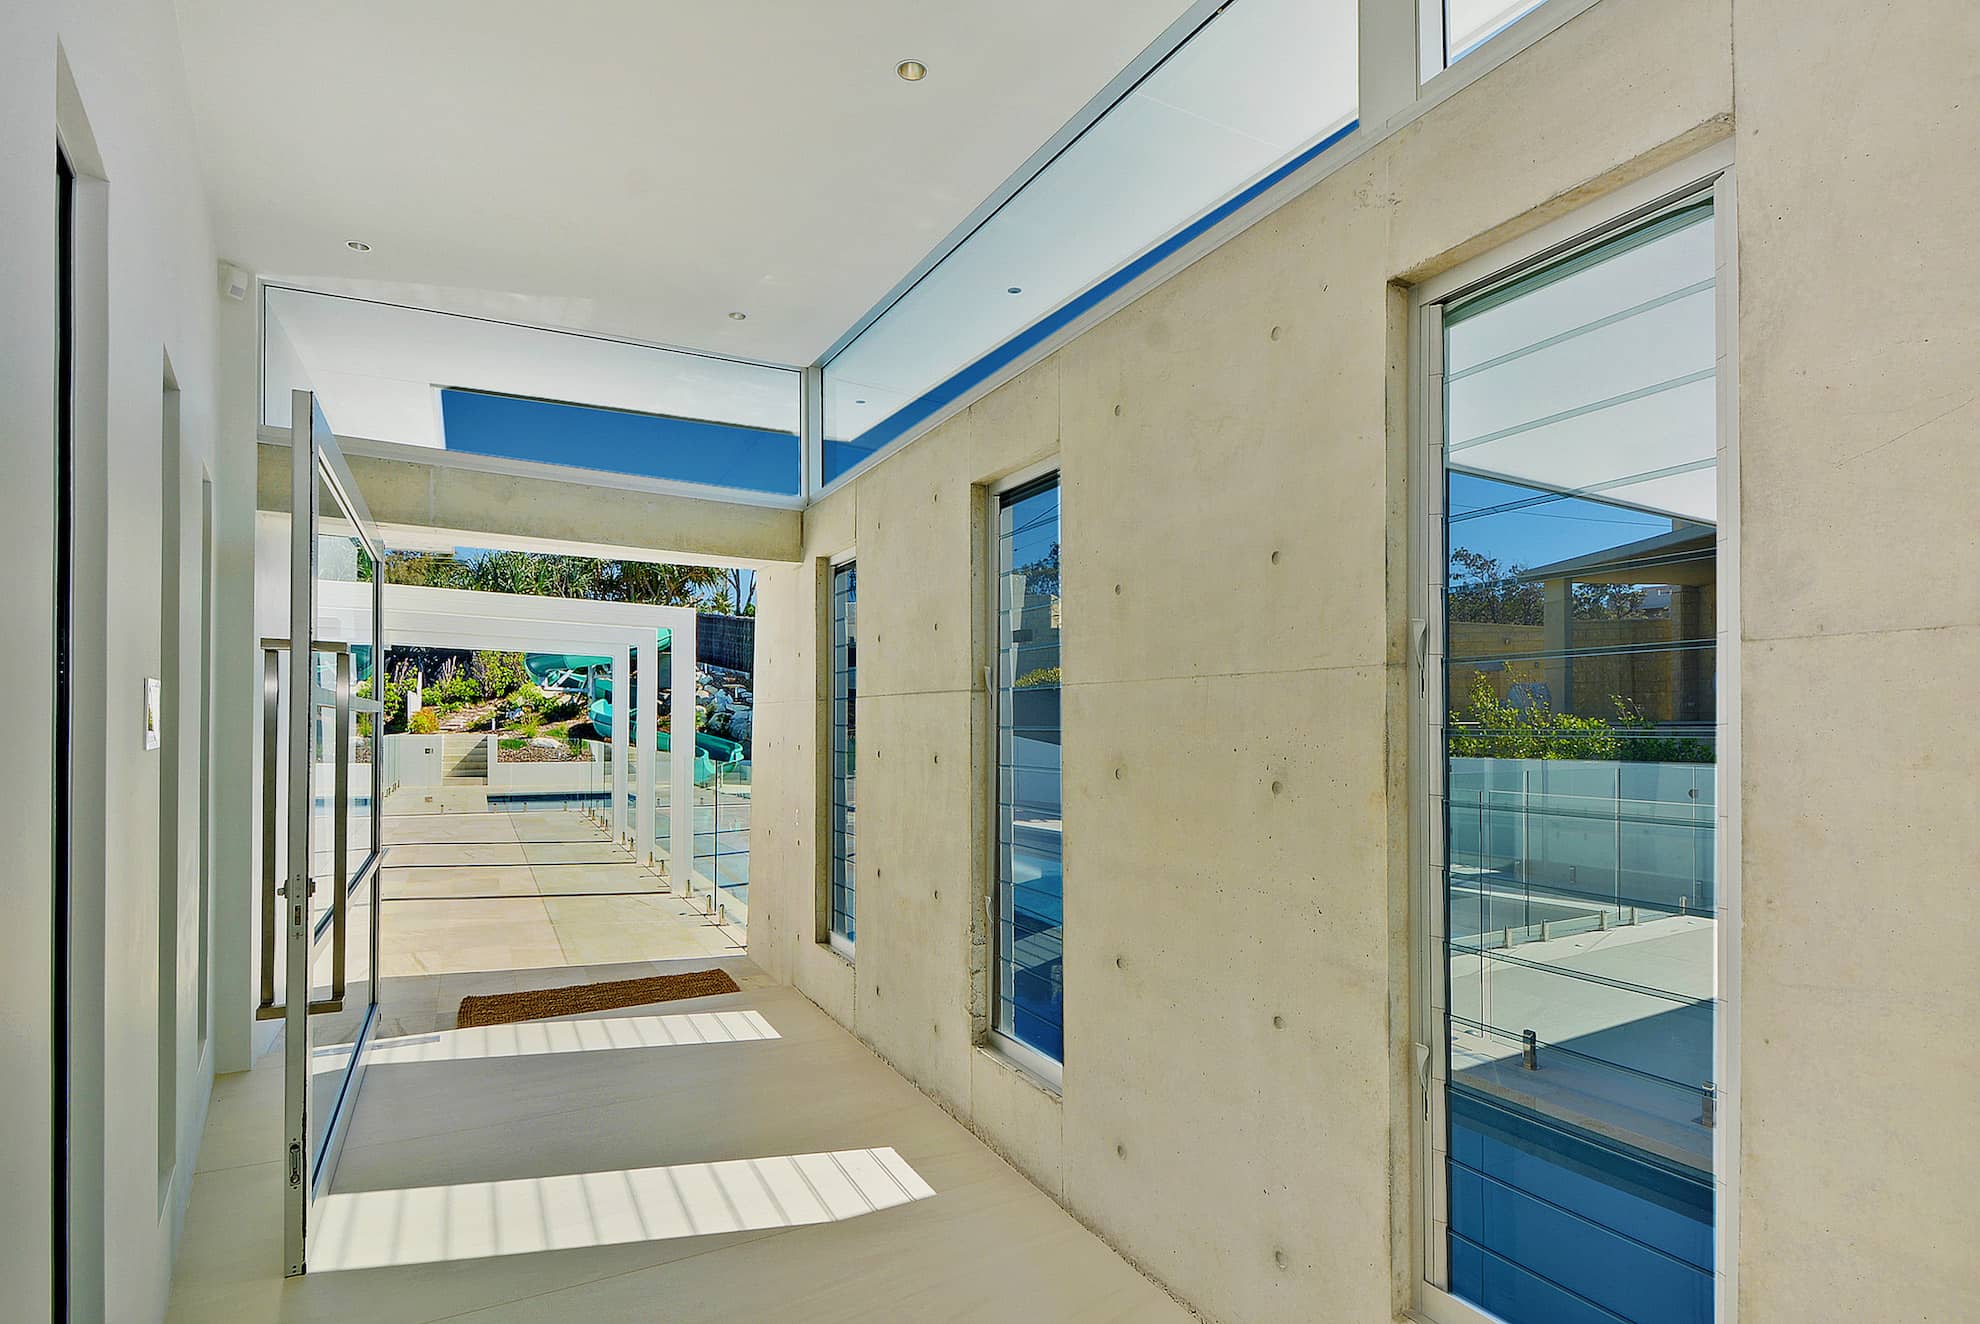 Beaches David Low Way project by mdesign, a building design practice that operates on the Sunshine Coast.